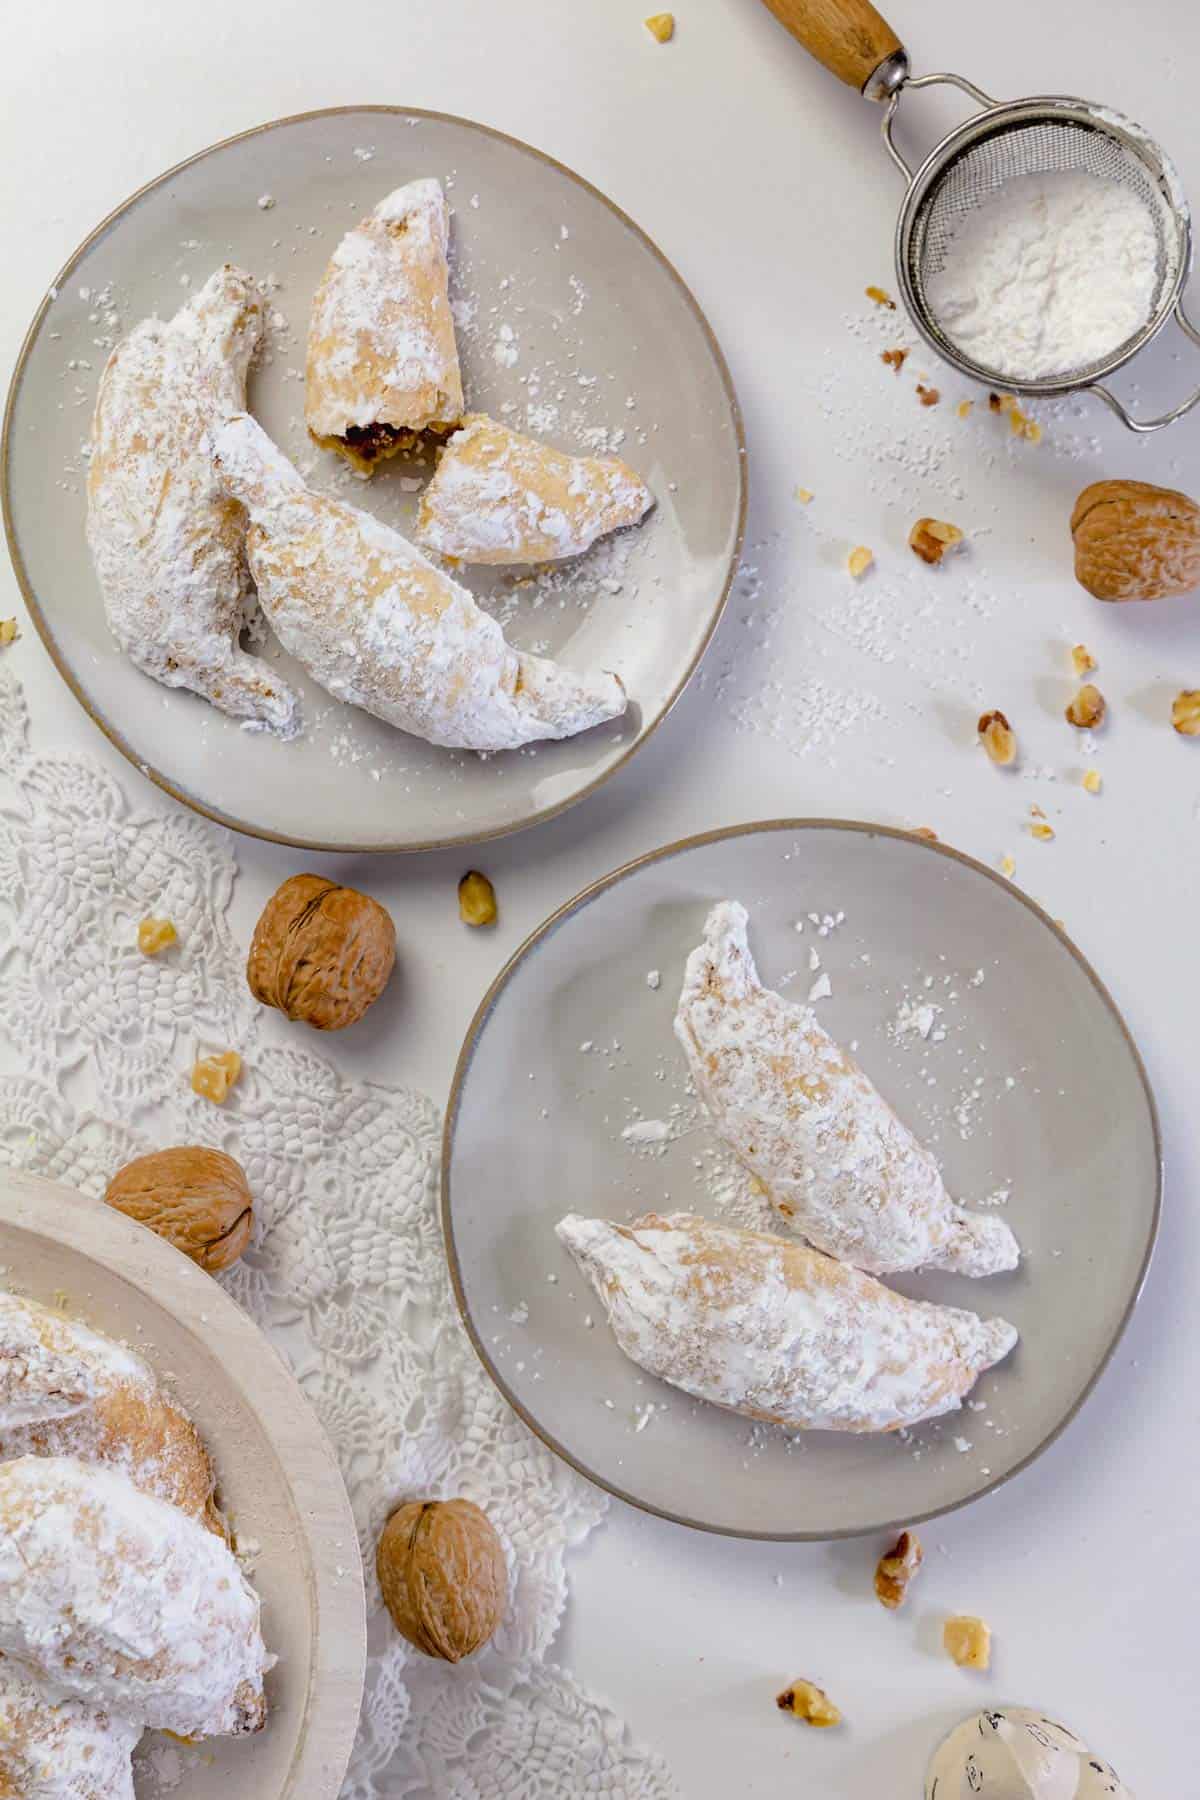 Two plates with Polish kiflies, walnuts, and powdered sugar on the table.